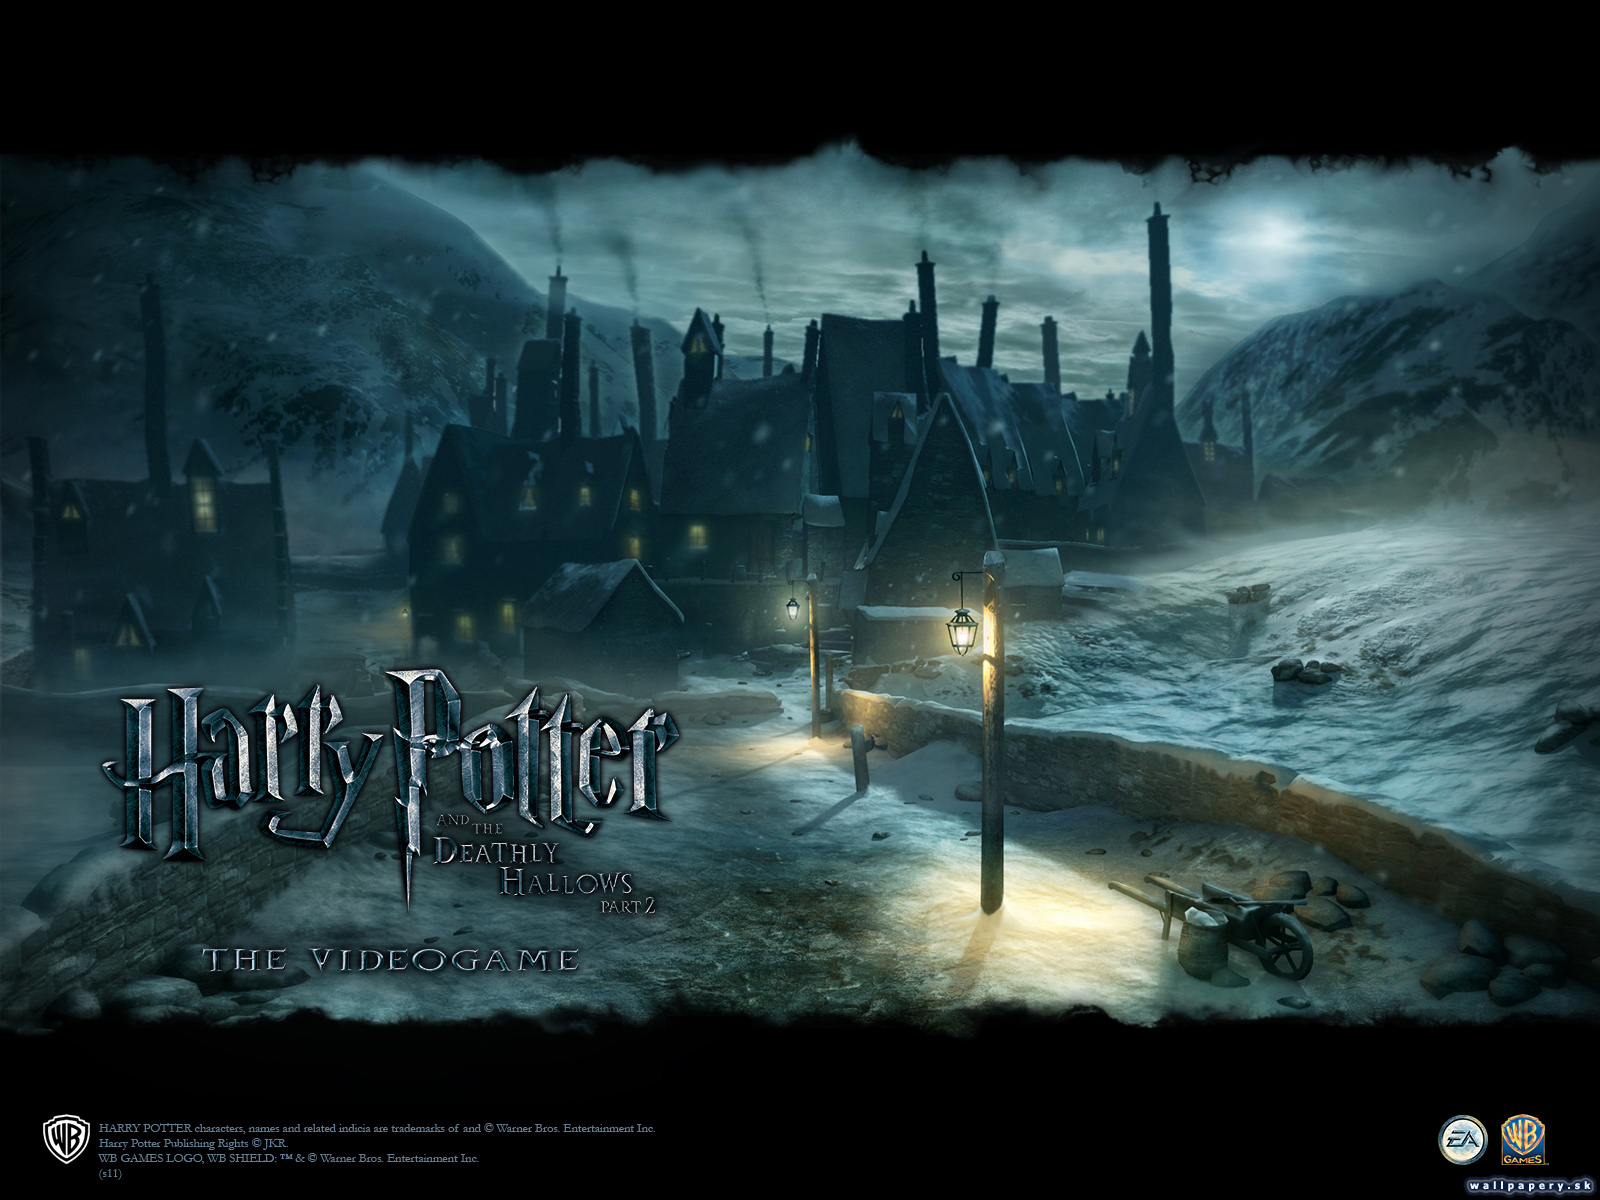 Harry Potter and the Deathly Hallows: Part 2 - wallpaper 2